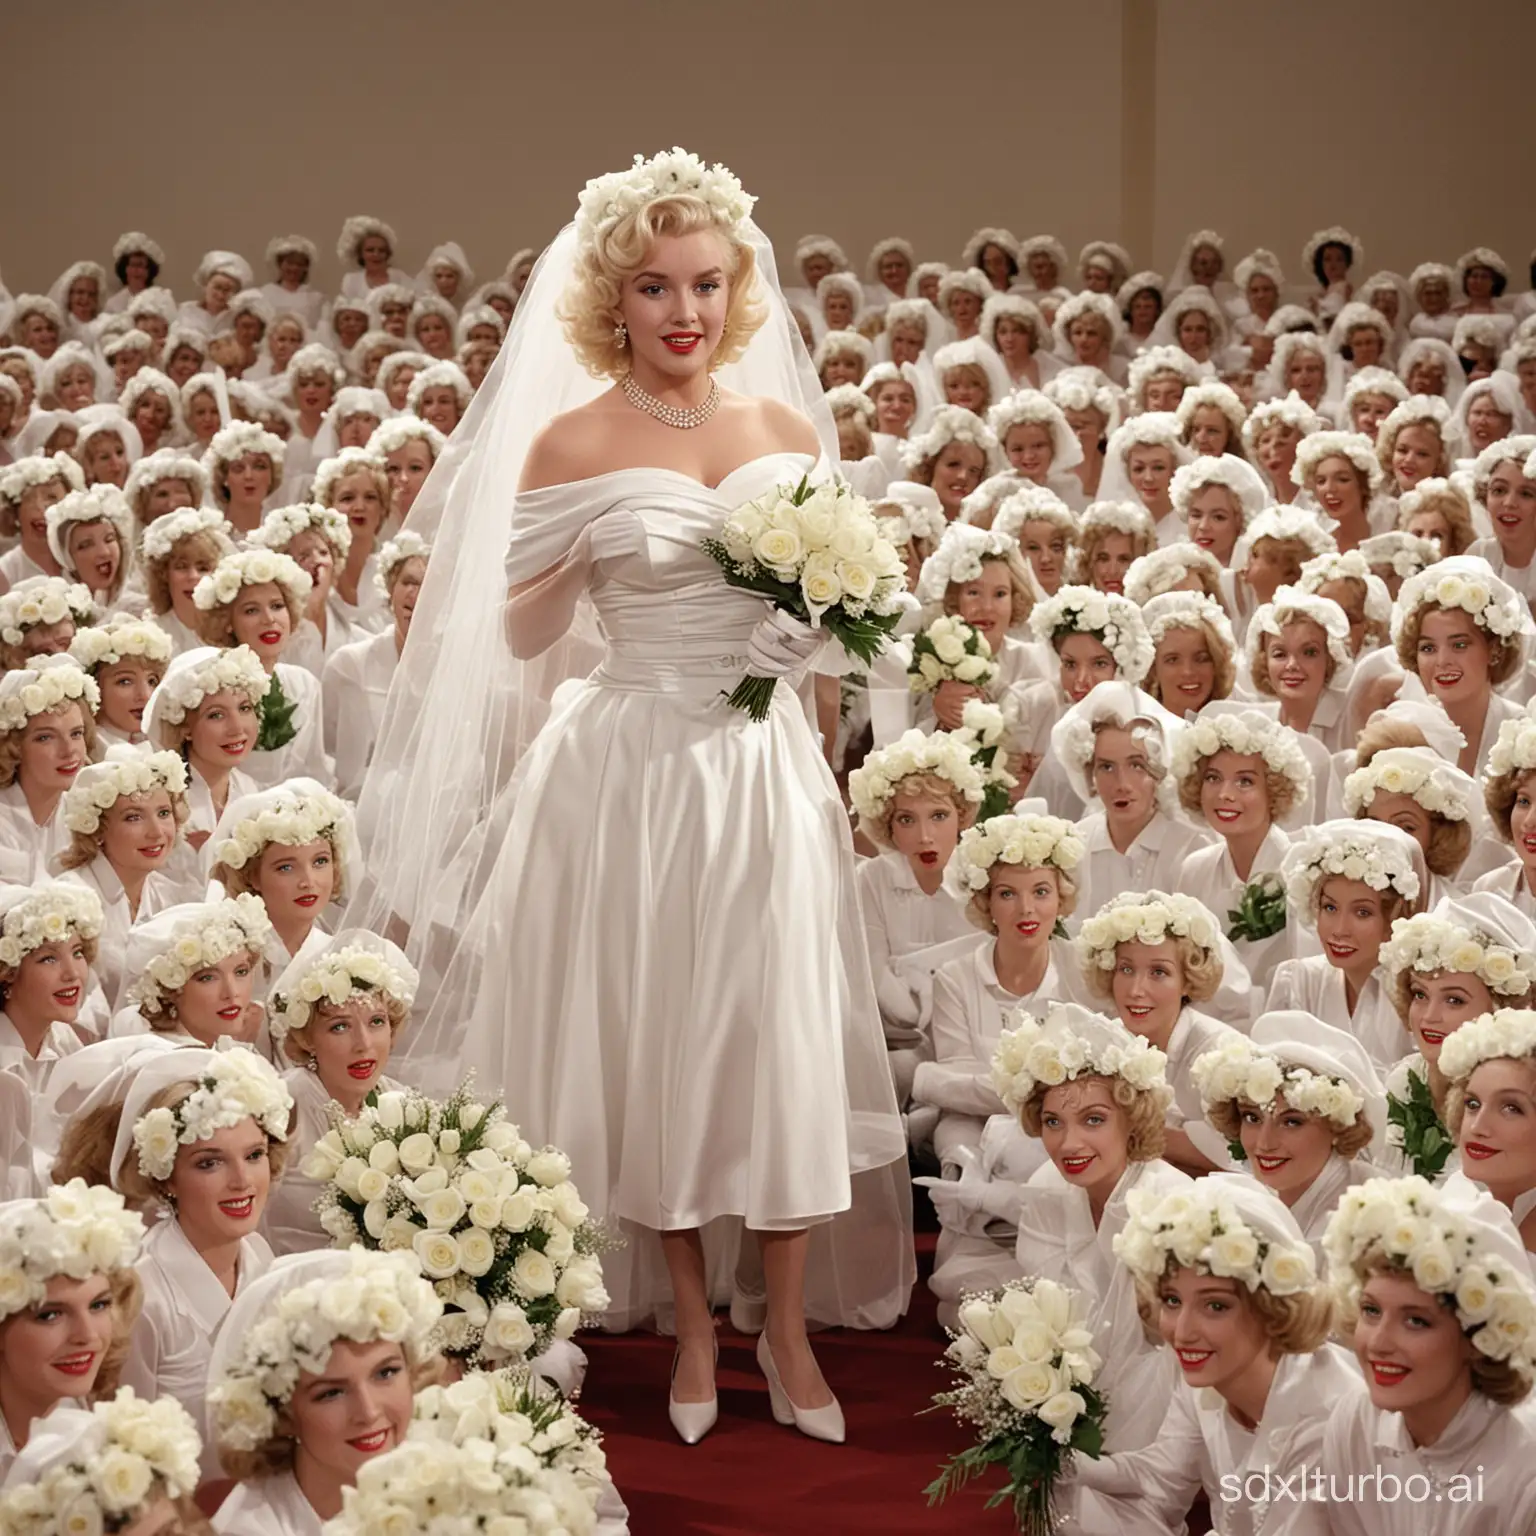 Marilyn Monroe dressed as a bride in veil and wreath with white gloves giving a lecture in the auditorium crowded with Marilyn Monroe and her clones dressed as brides in veil and wreath with white gloves and bouquet of flowers